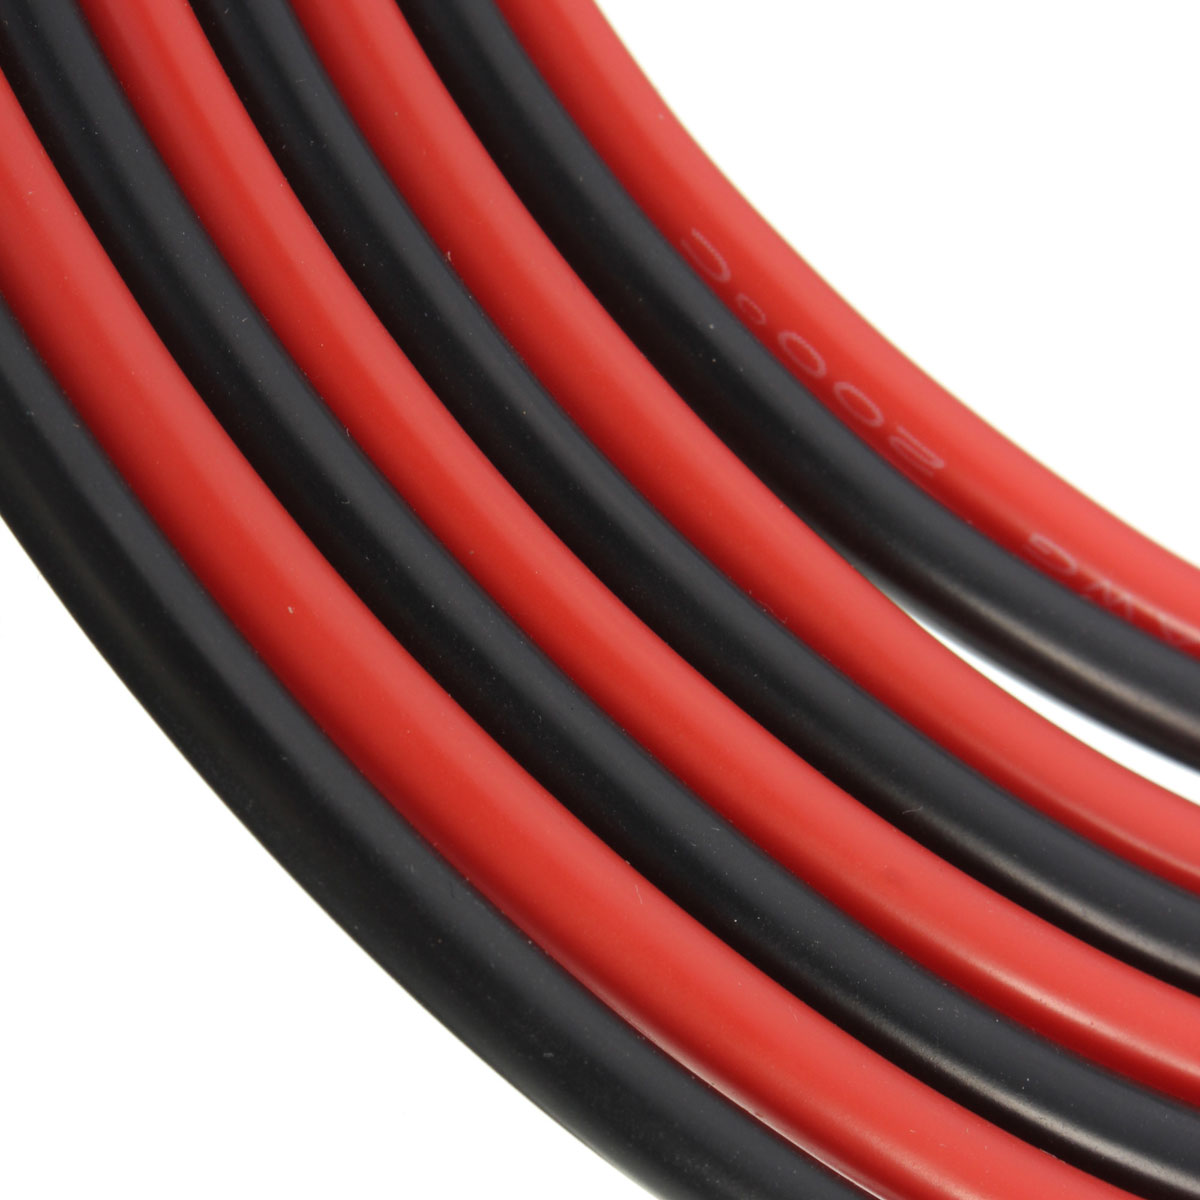 DANIU-12-AWG-10-Feet-3M-Gauge-Silicone-Wire-Flexible-Stranded-Copper-Cables-For-RC-Circuit-1170306-6